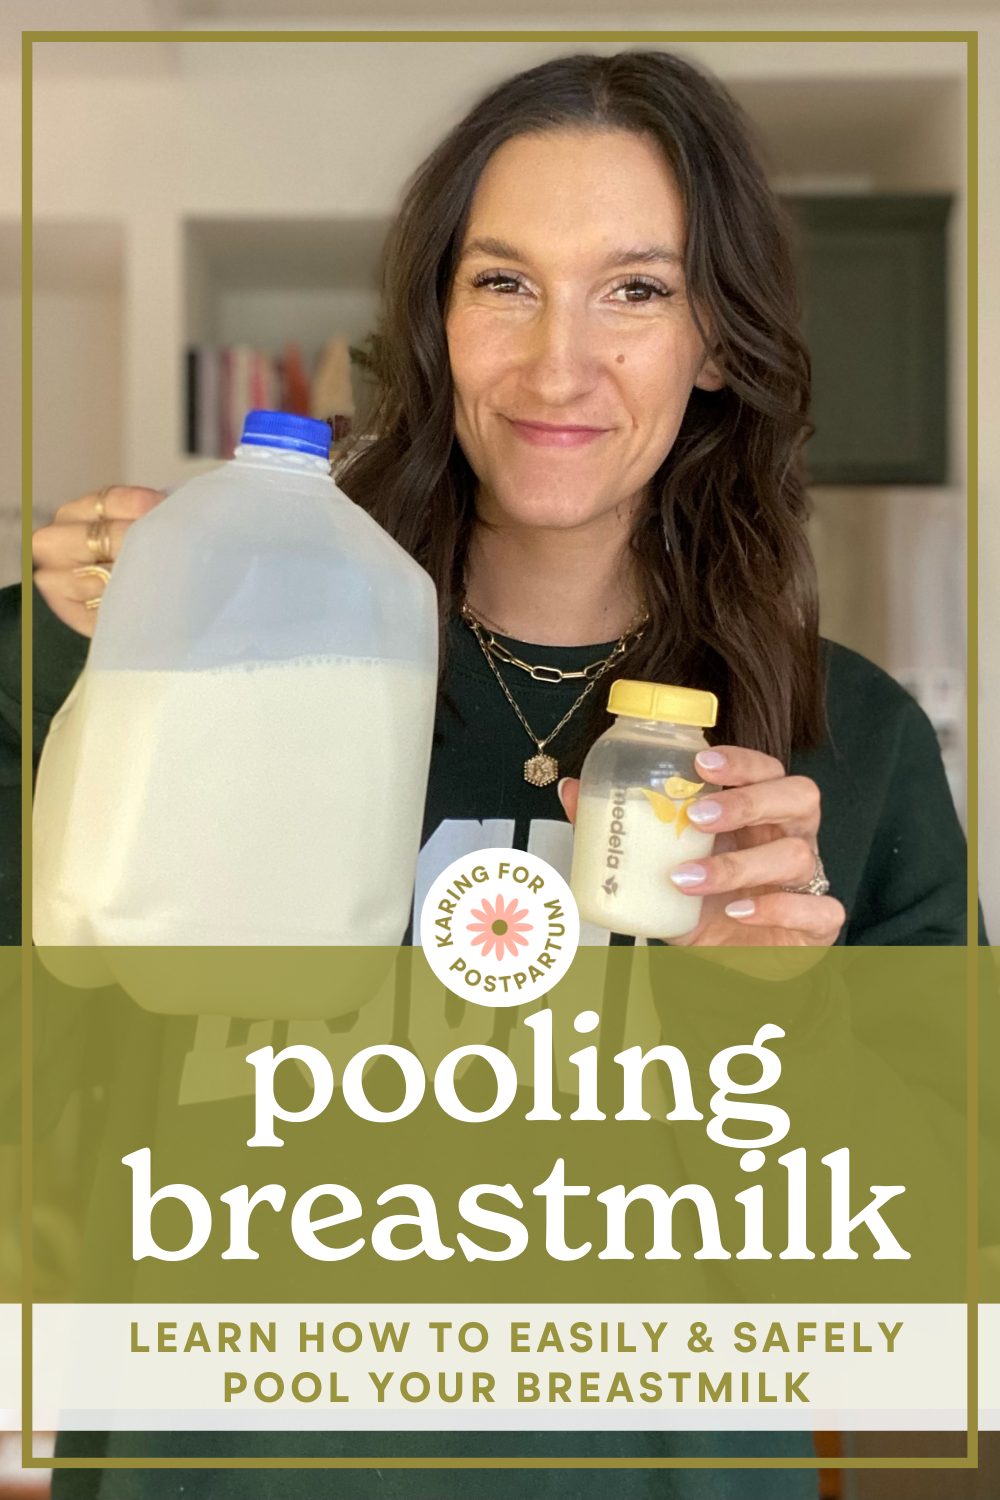 Out of the house with breast milk - How we did it. - Milk and